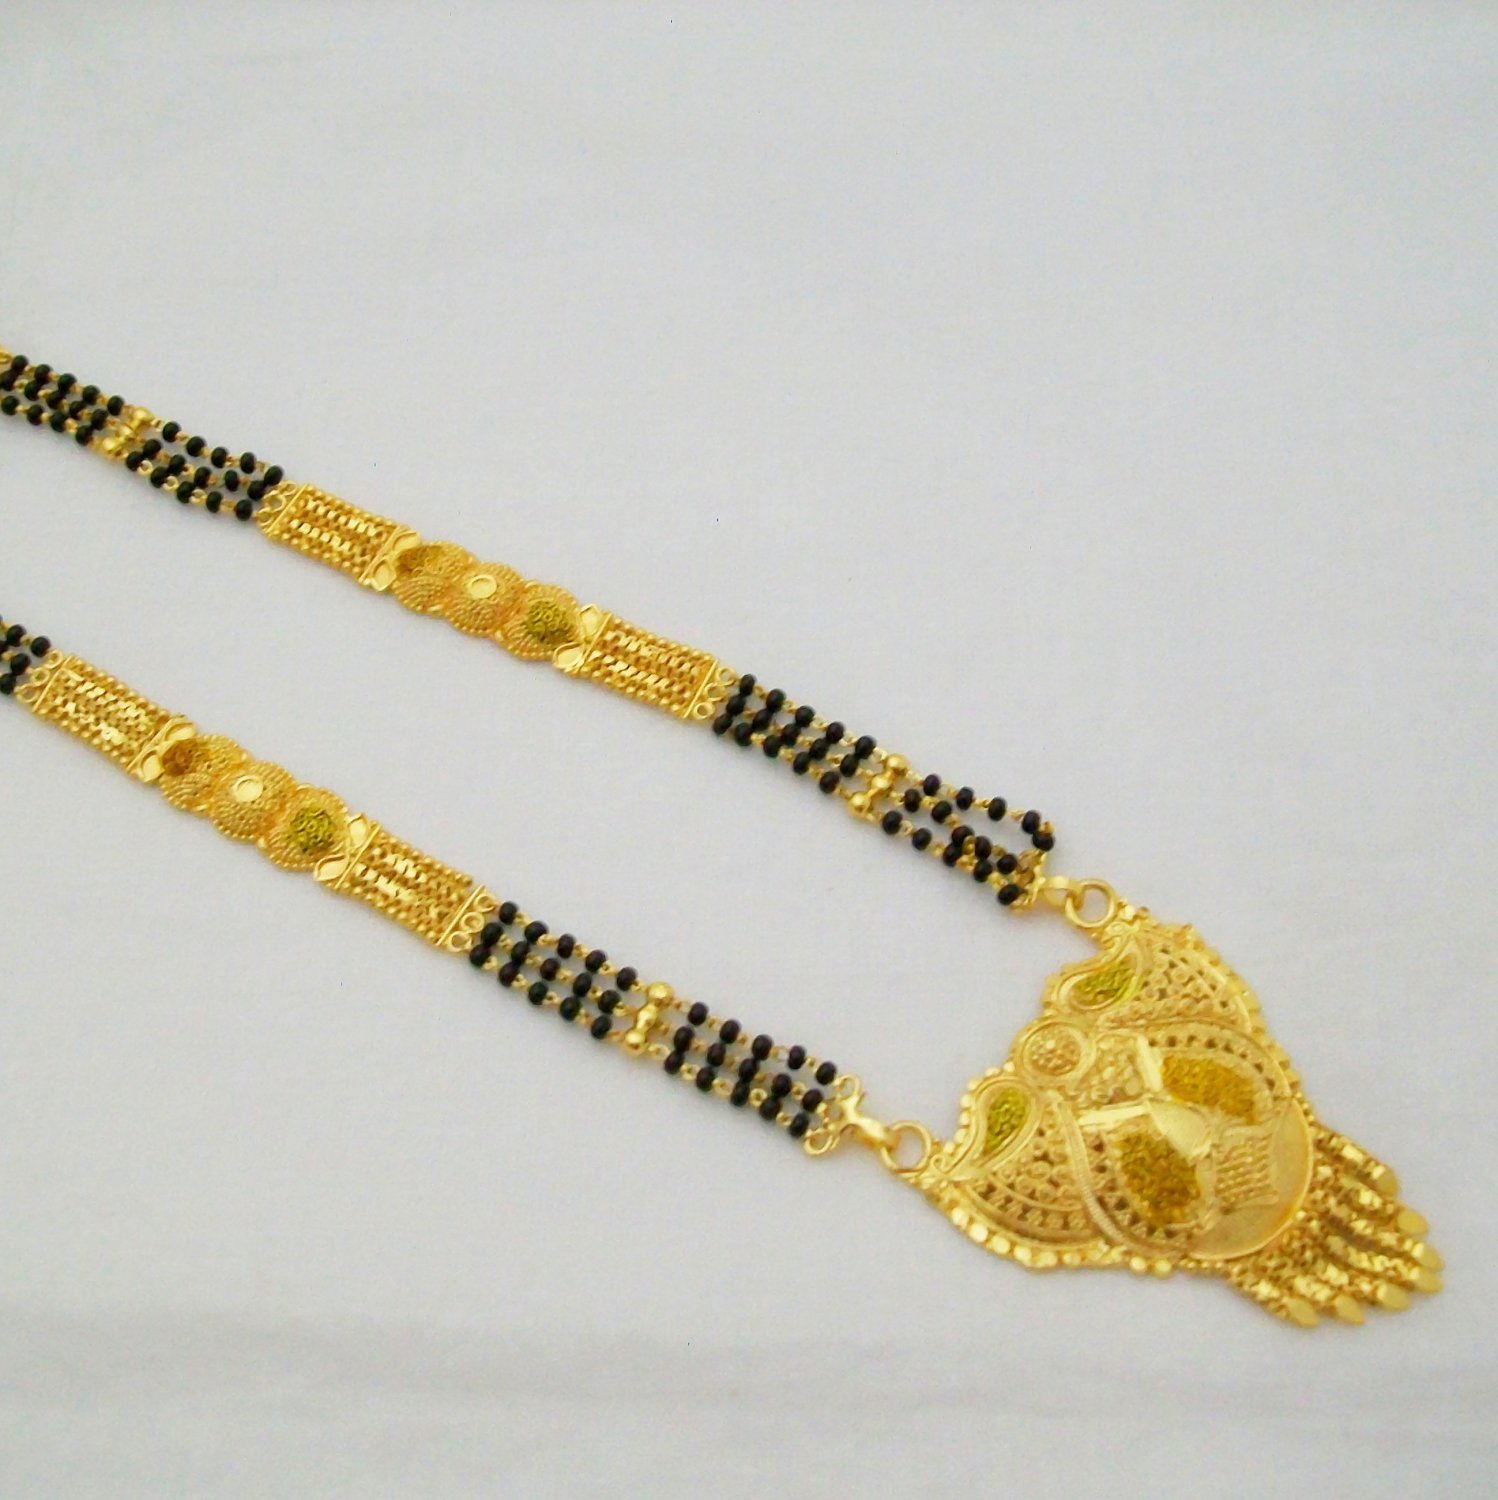 Mangalsutra Black Beads Chain Pendant Necklace Indian Women Gold Plated